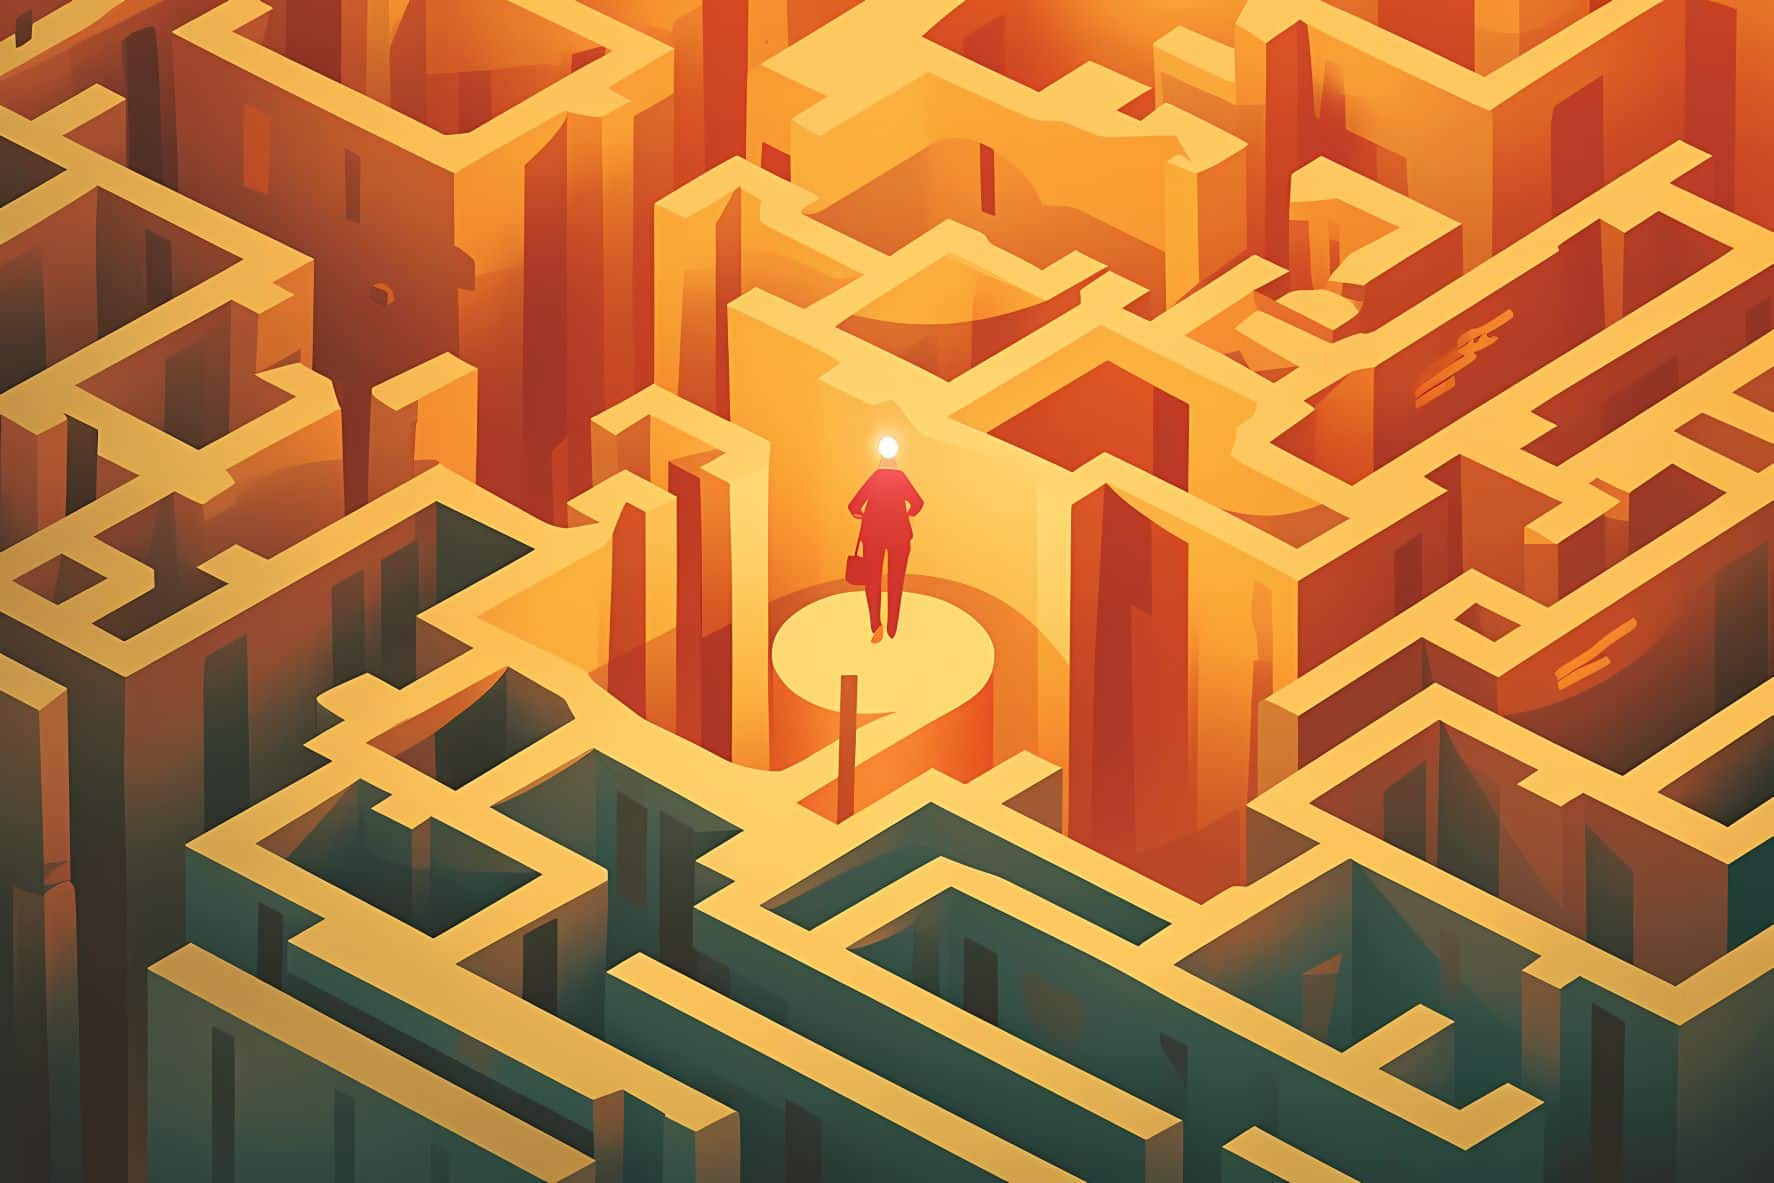 Finding your way through the maze